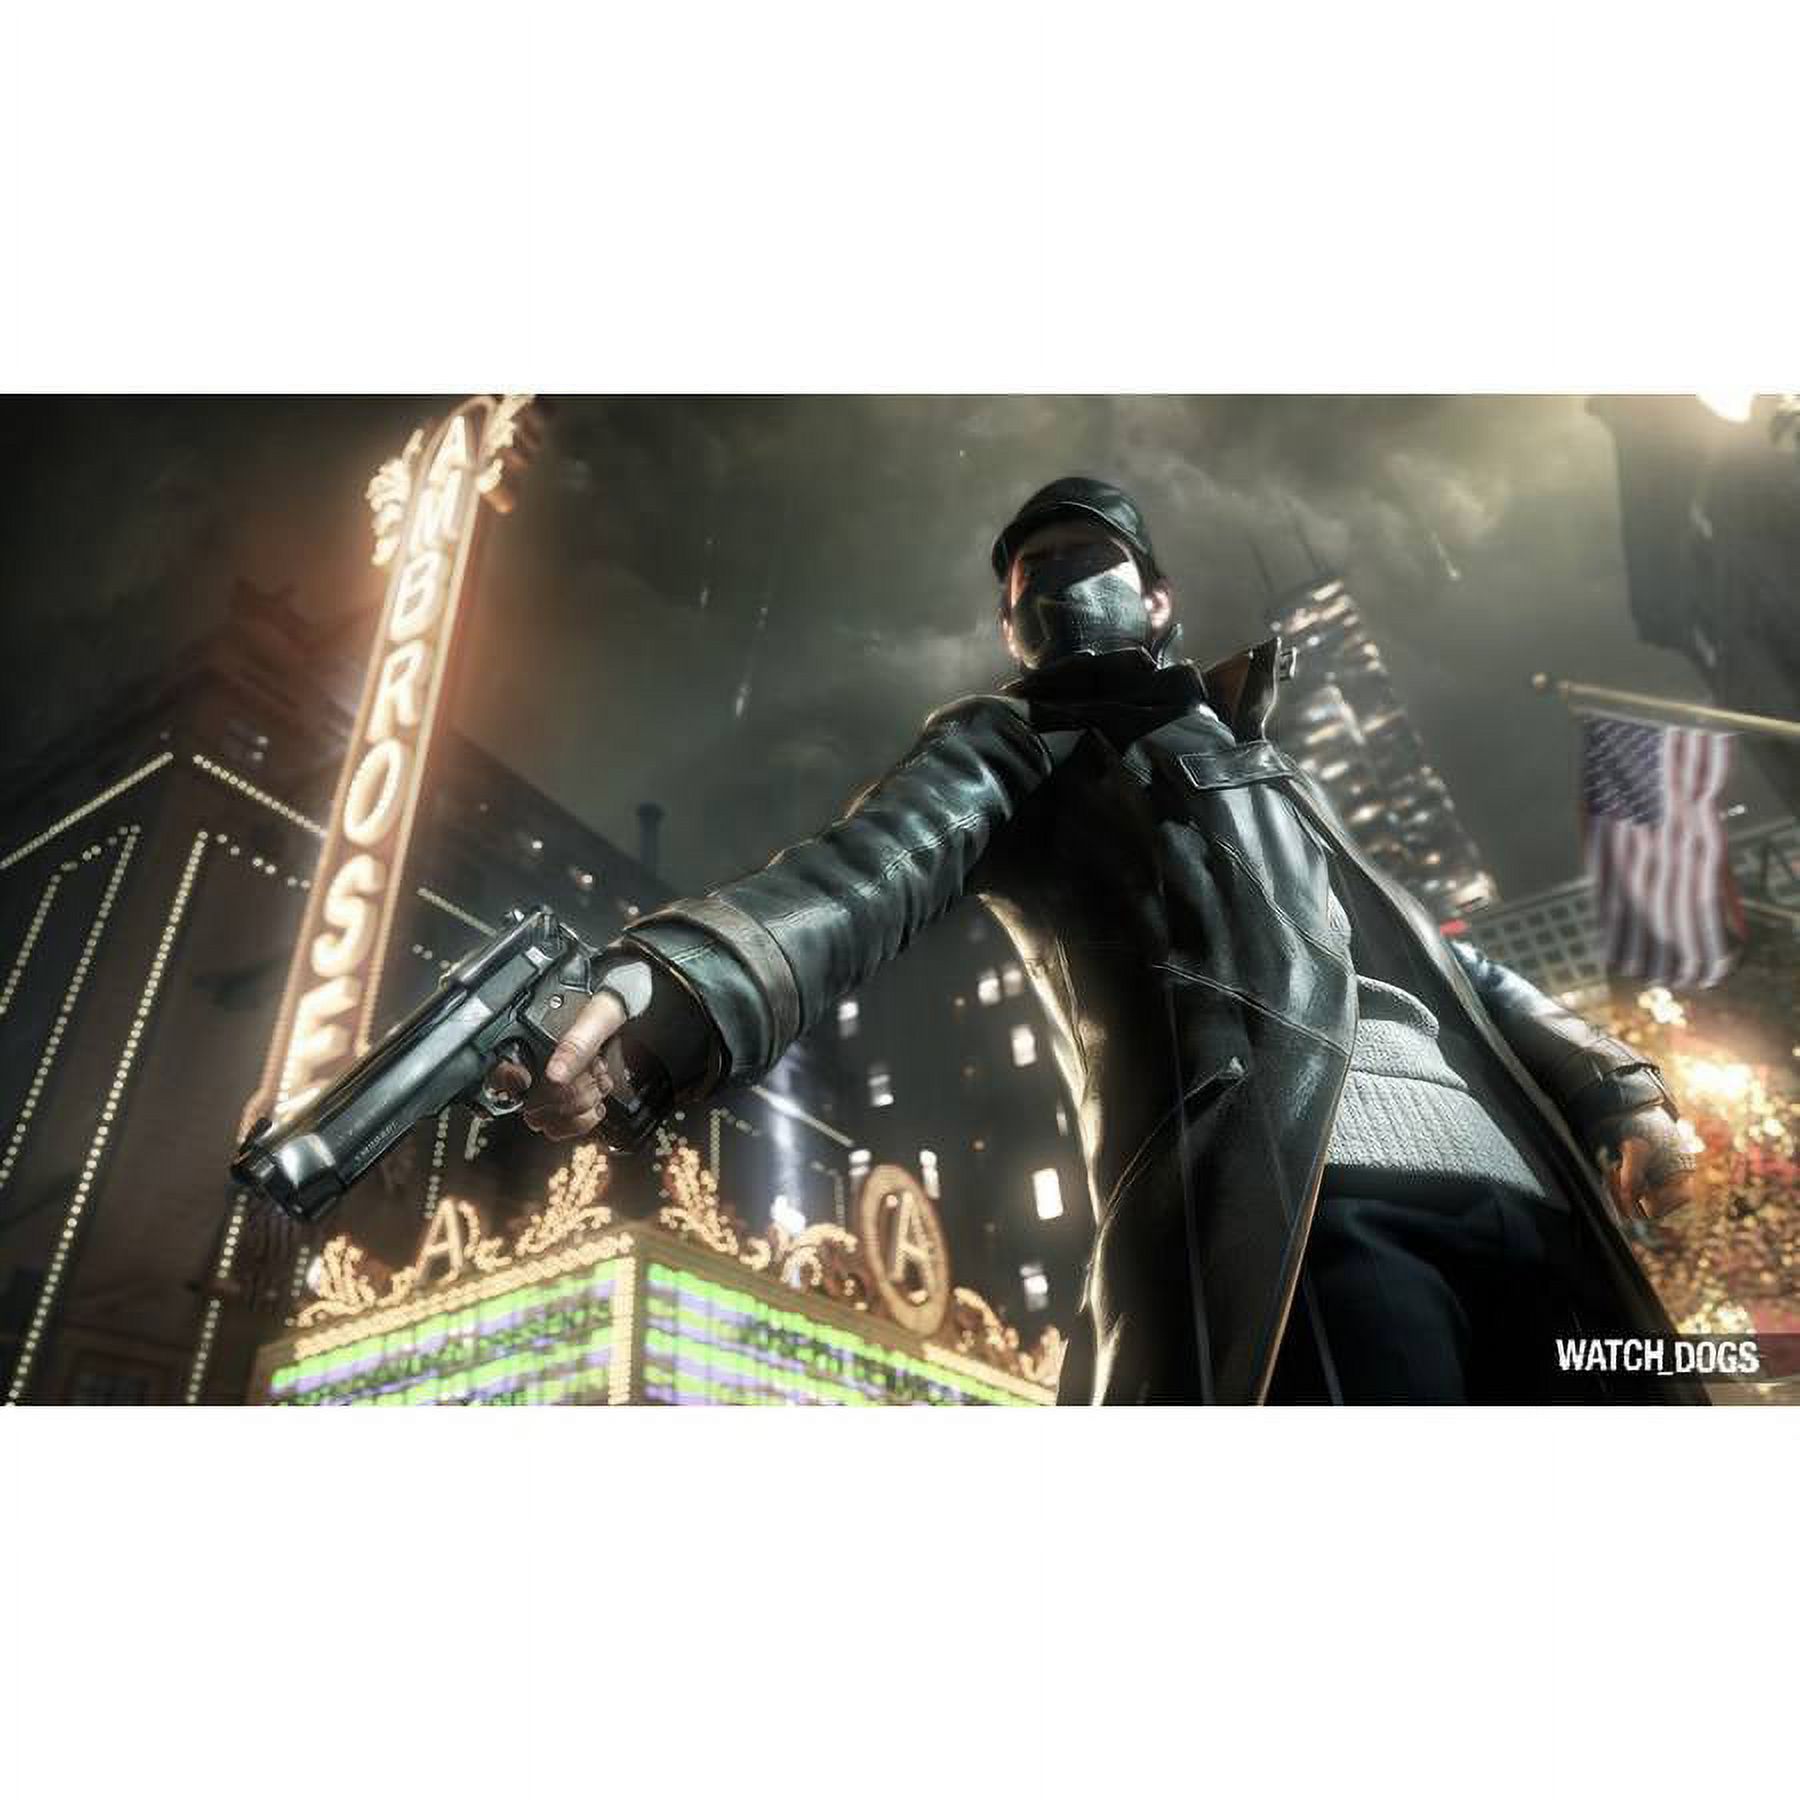 Watch Dogs - image 4 of 6